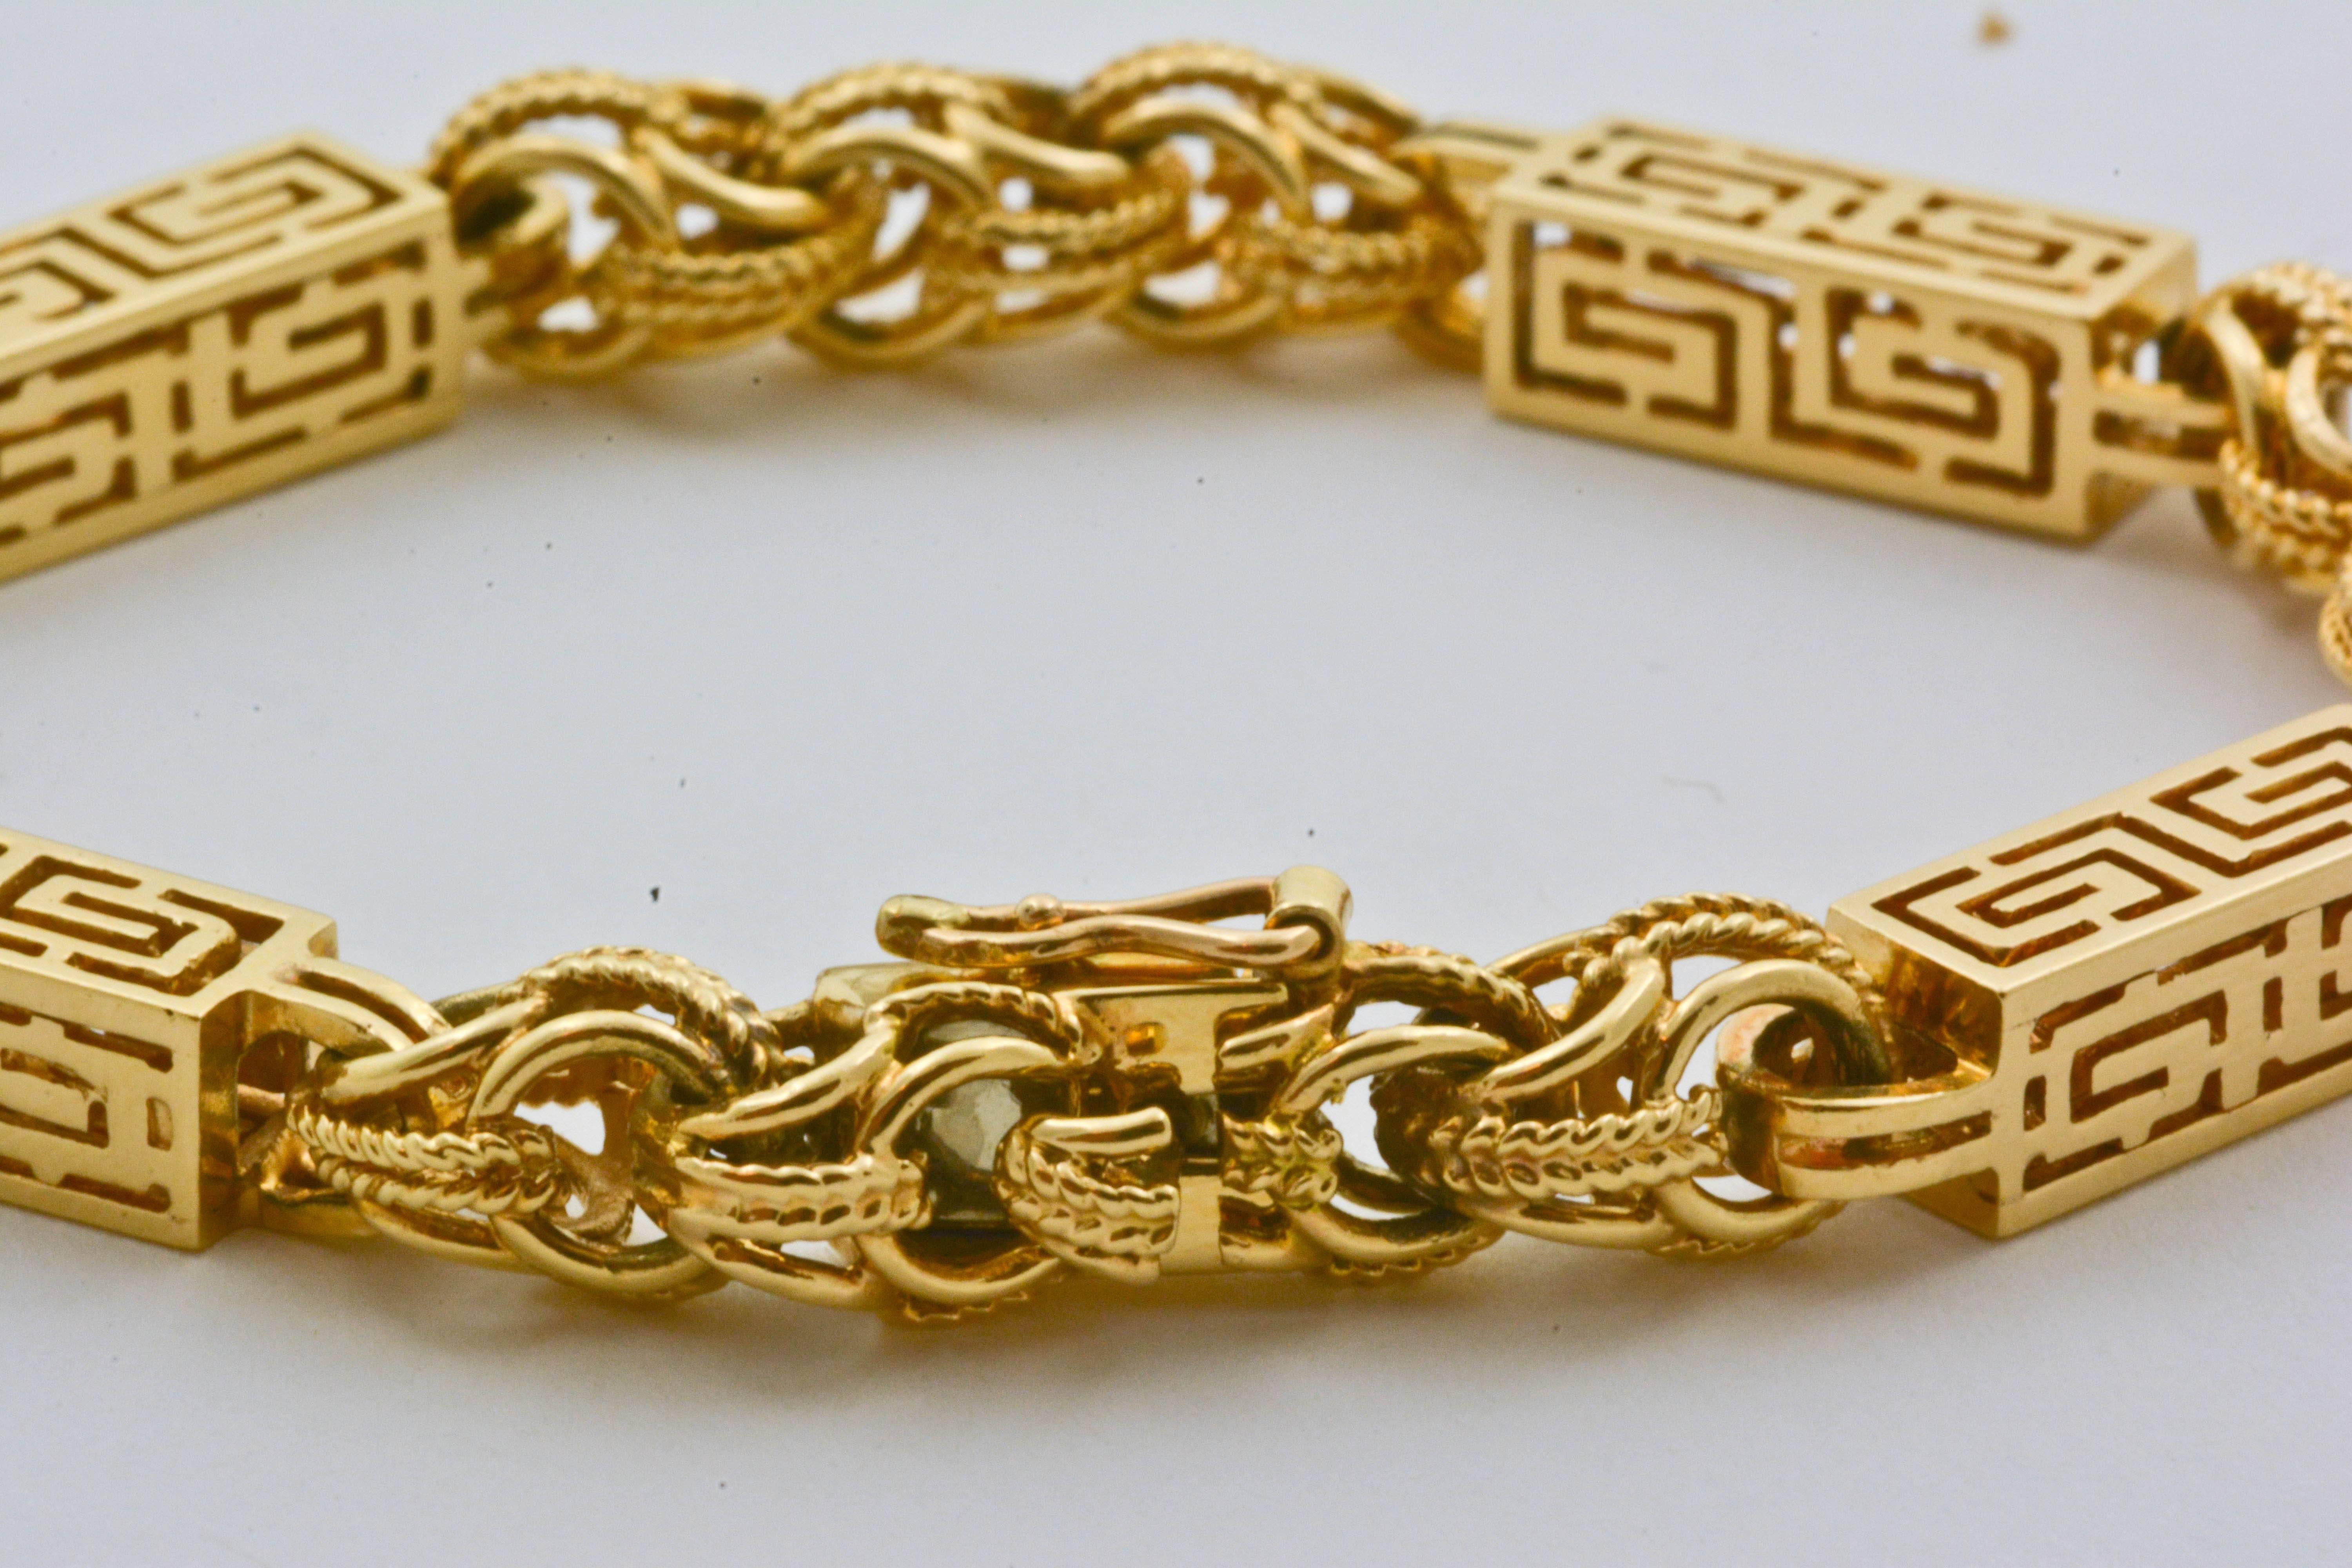 A repeating Greek key design makes this fashionable gold bracelet unique. Featuring rope-textured links and stunning artistry, this bracelet measures 8in long and 4mm thick, making it the perfect size for comfort and style.